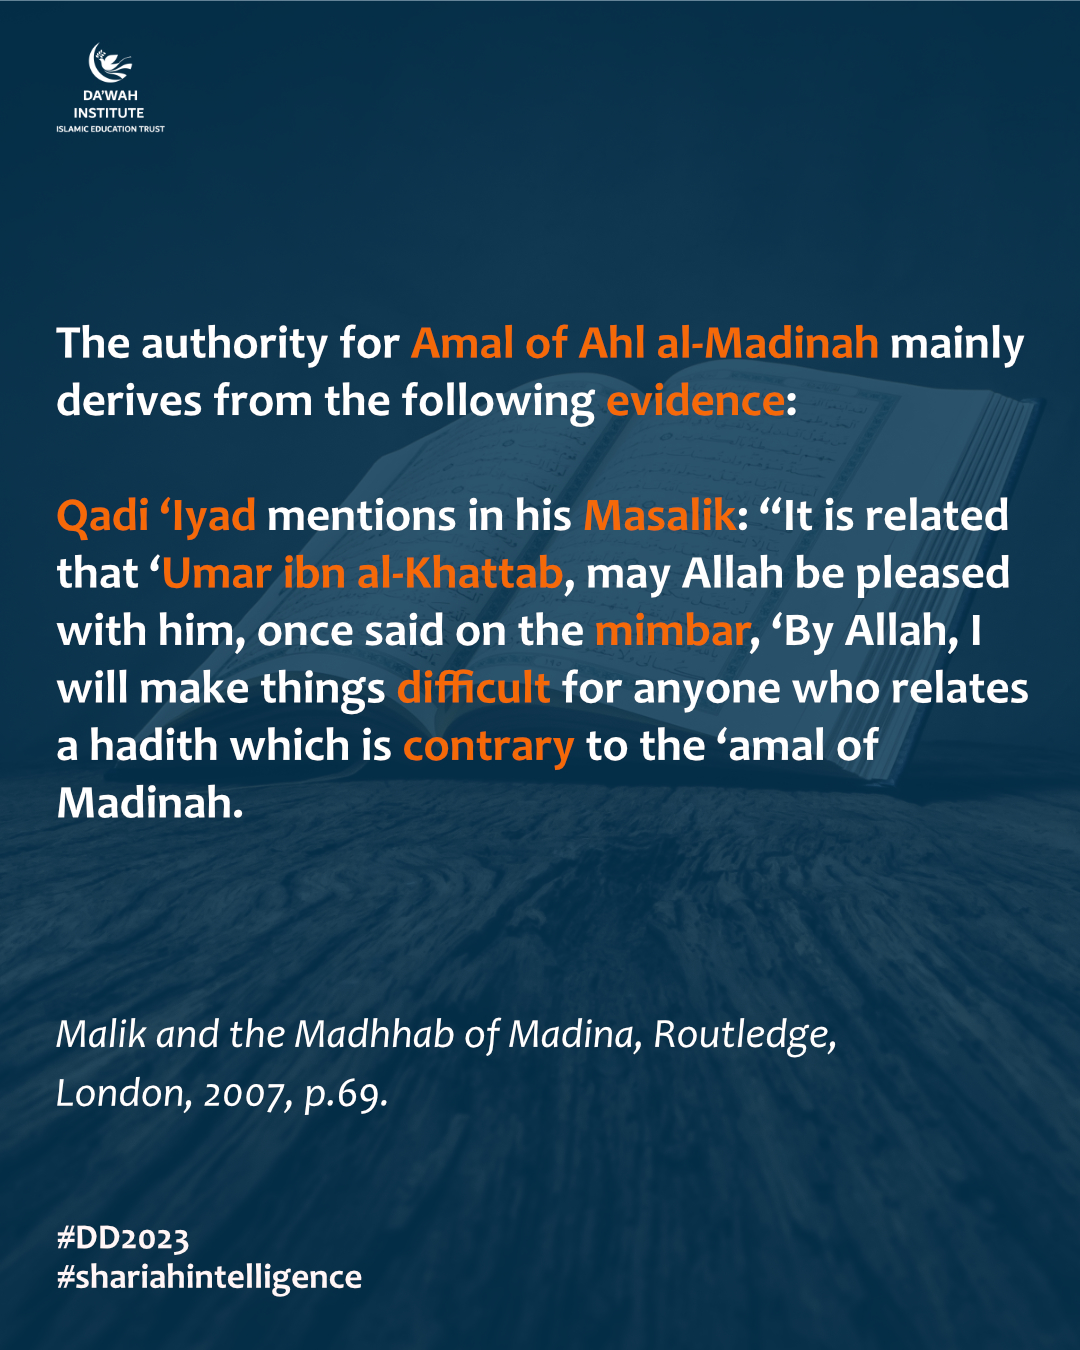 The authority for Amal of Ahl al-Madinah